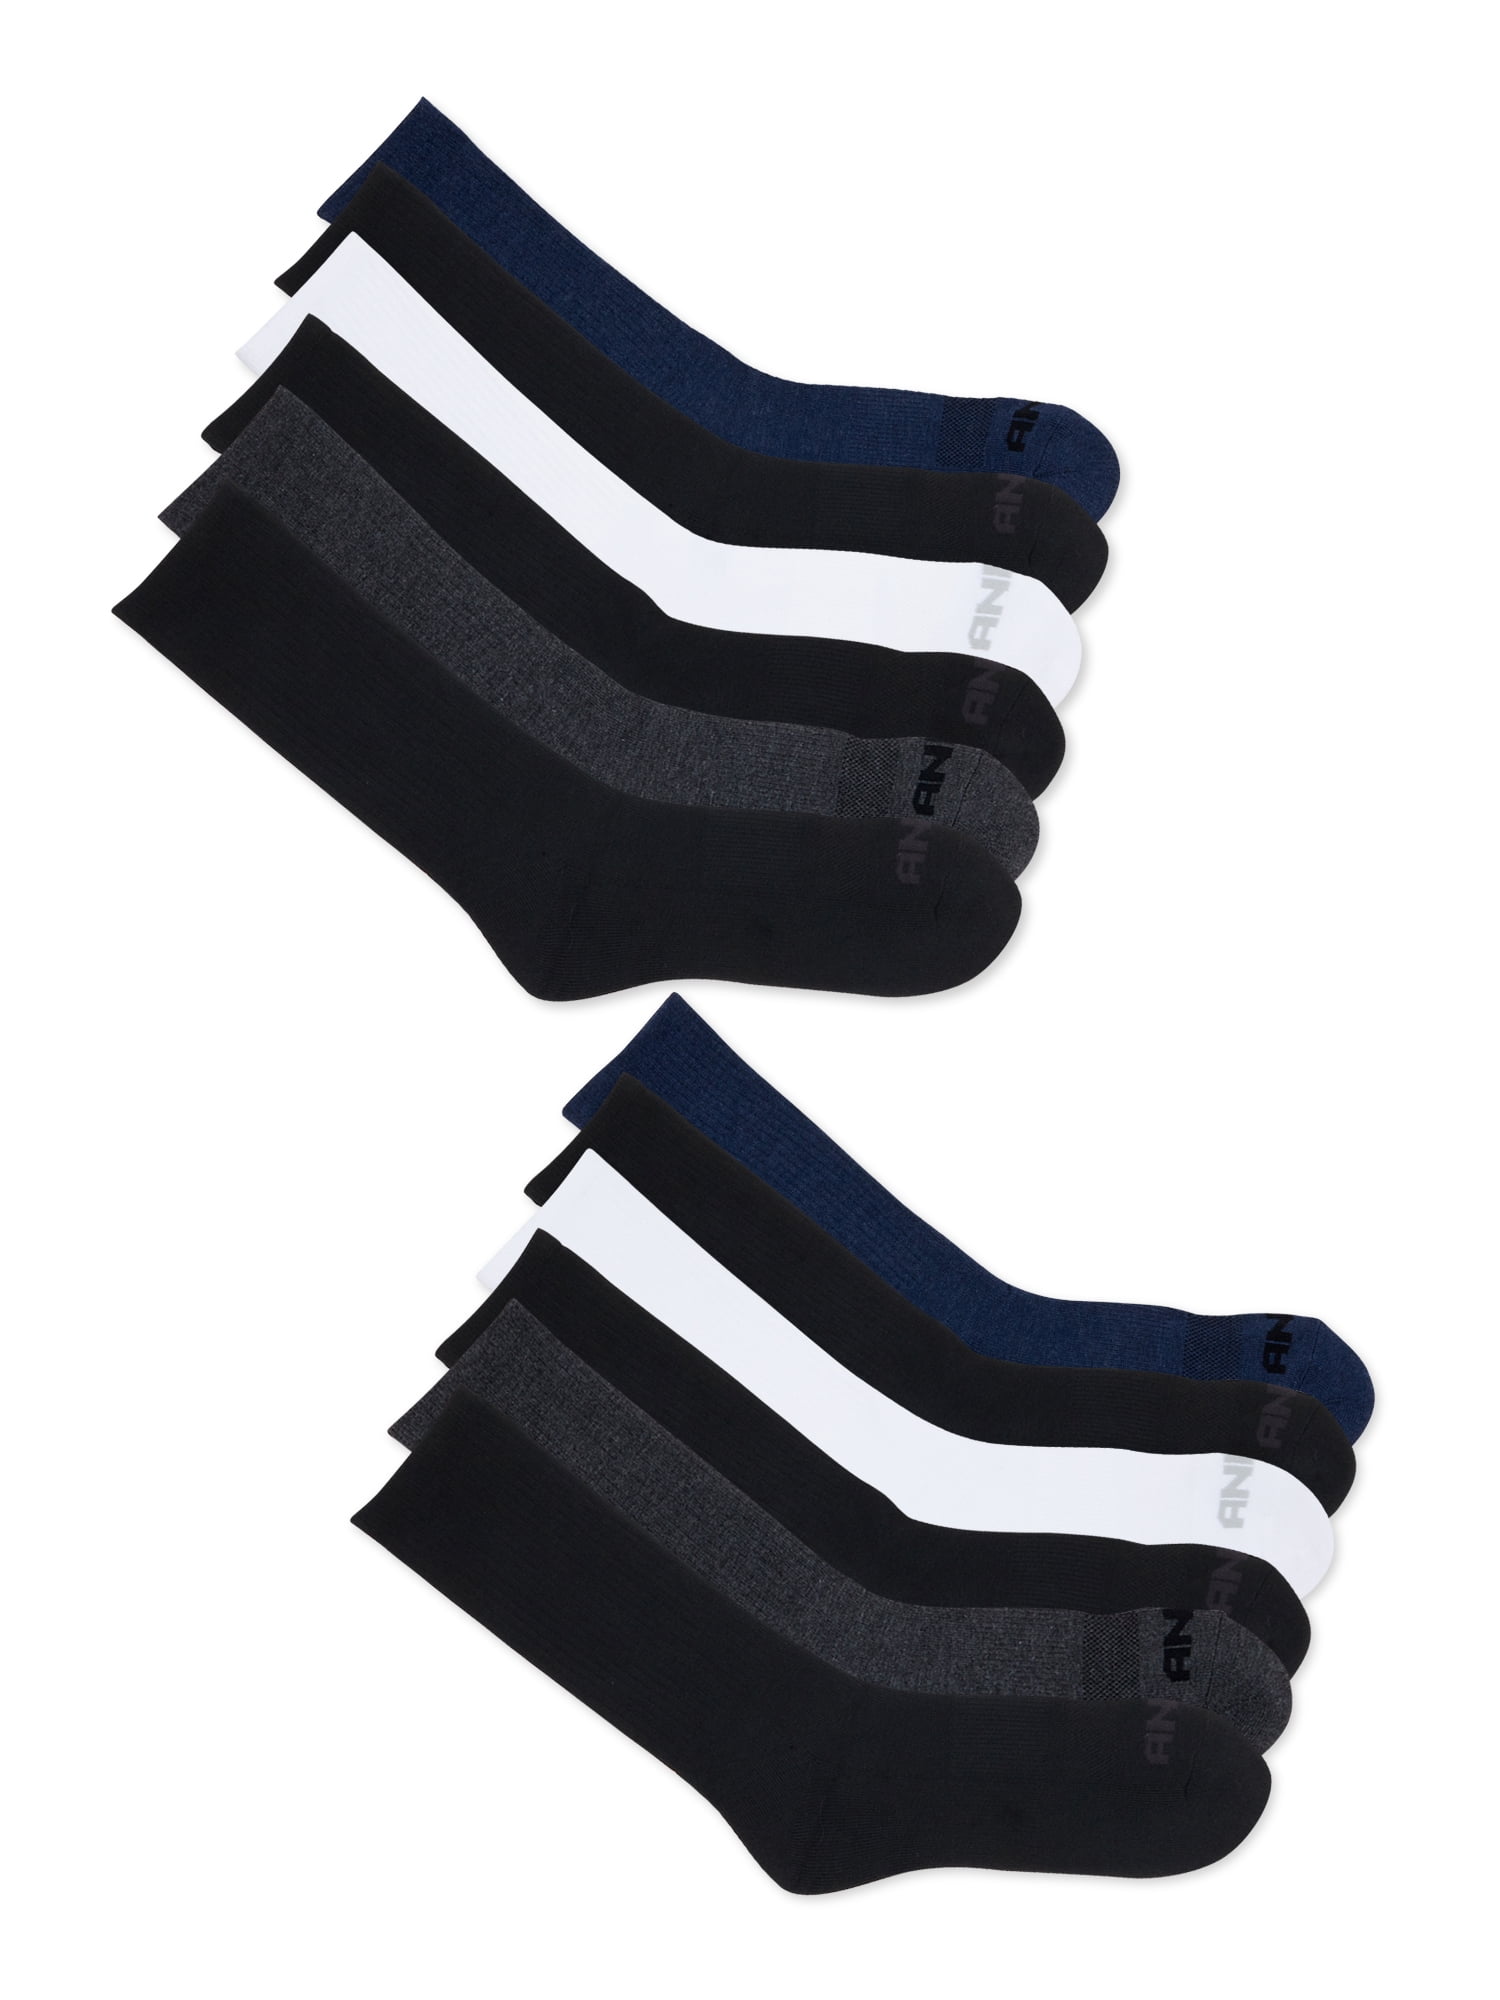 AND1 Men's Athletic Arch Compression Cushion Comfort Crew Socks 12 Pack 